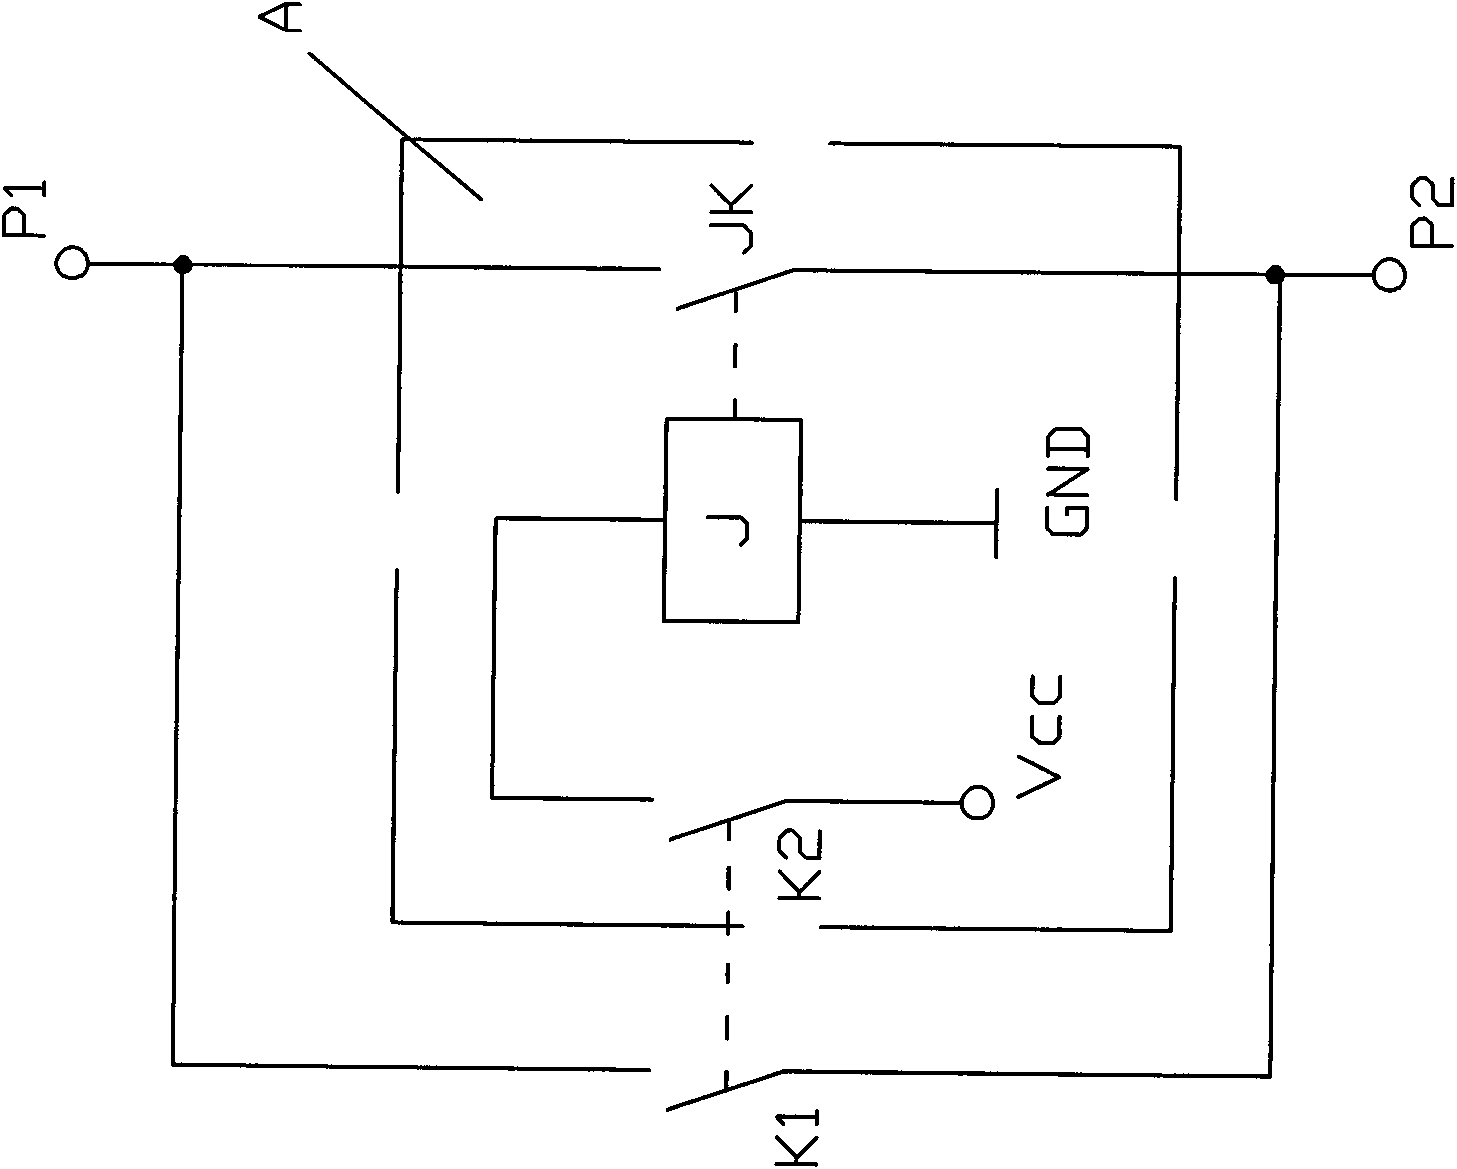 Arc-suppression circuit of alternating-current contactor